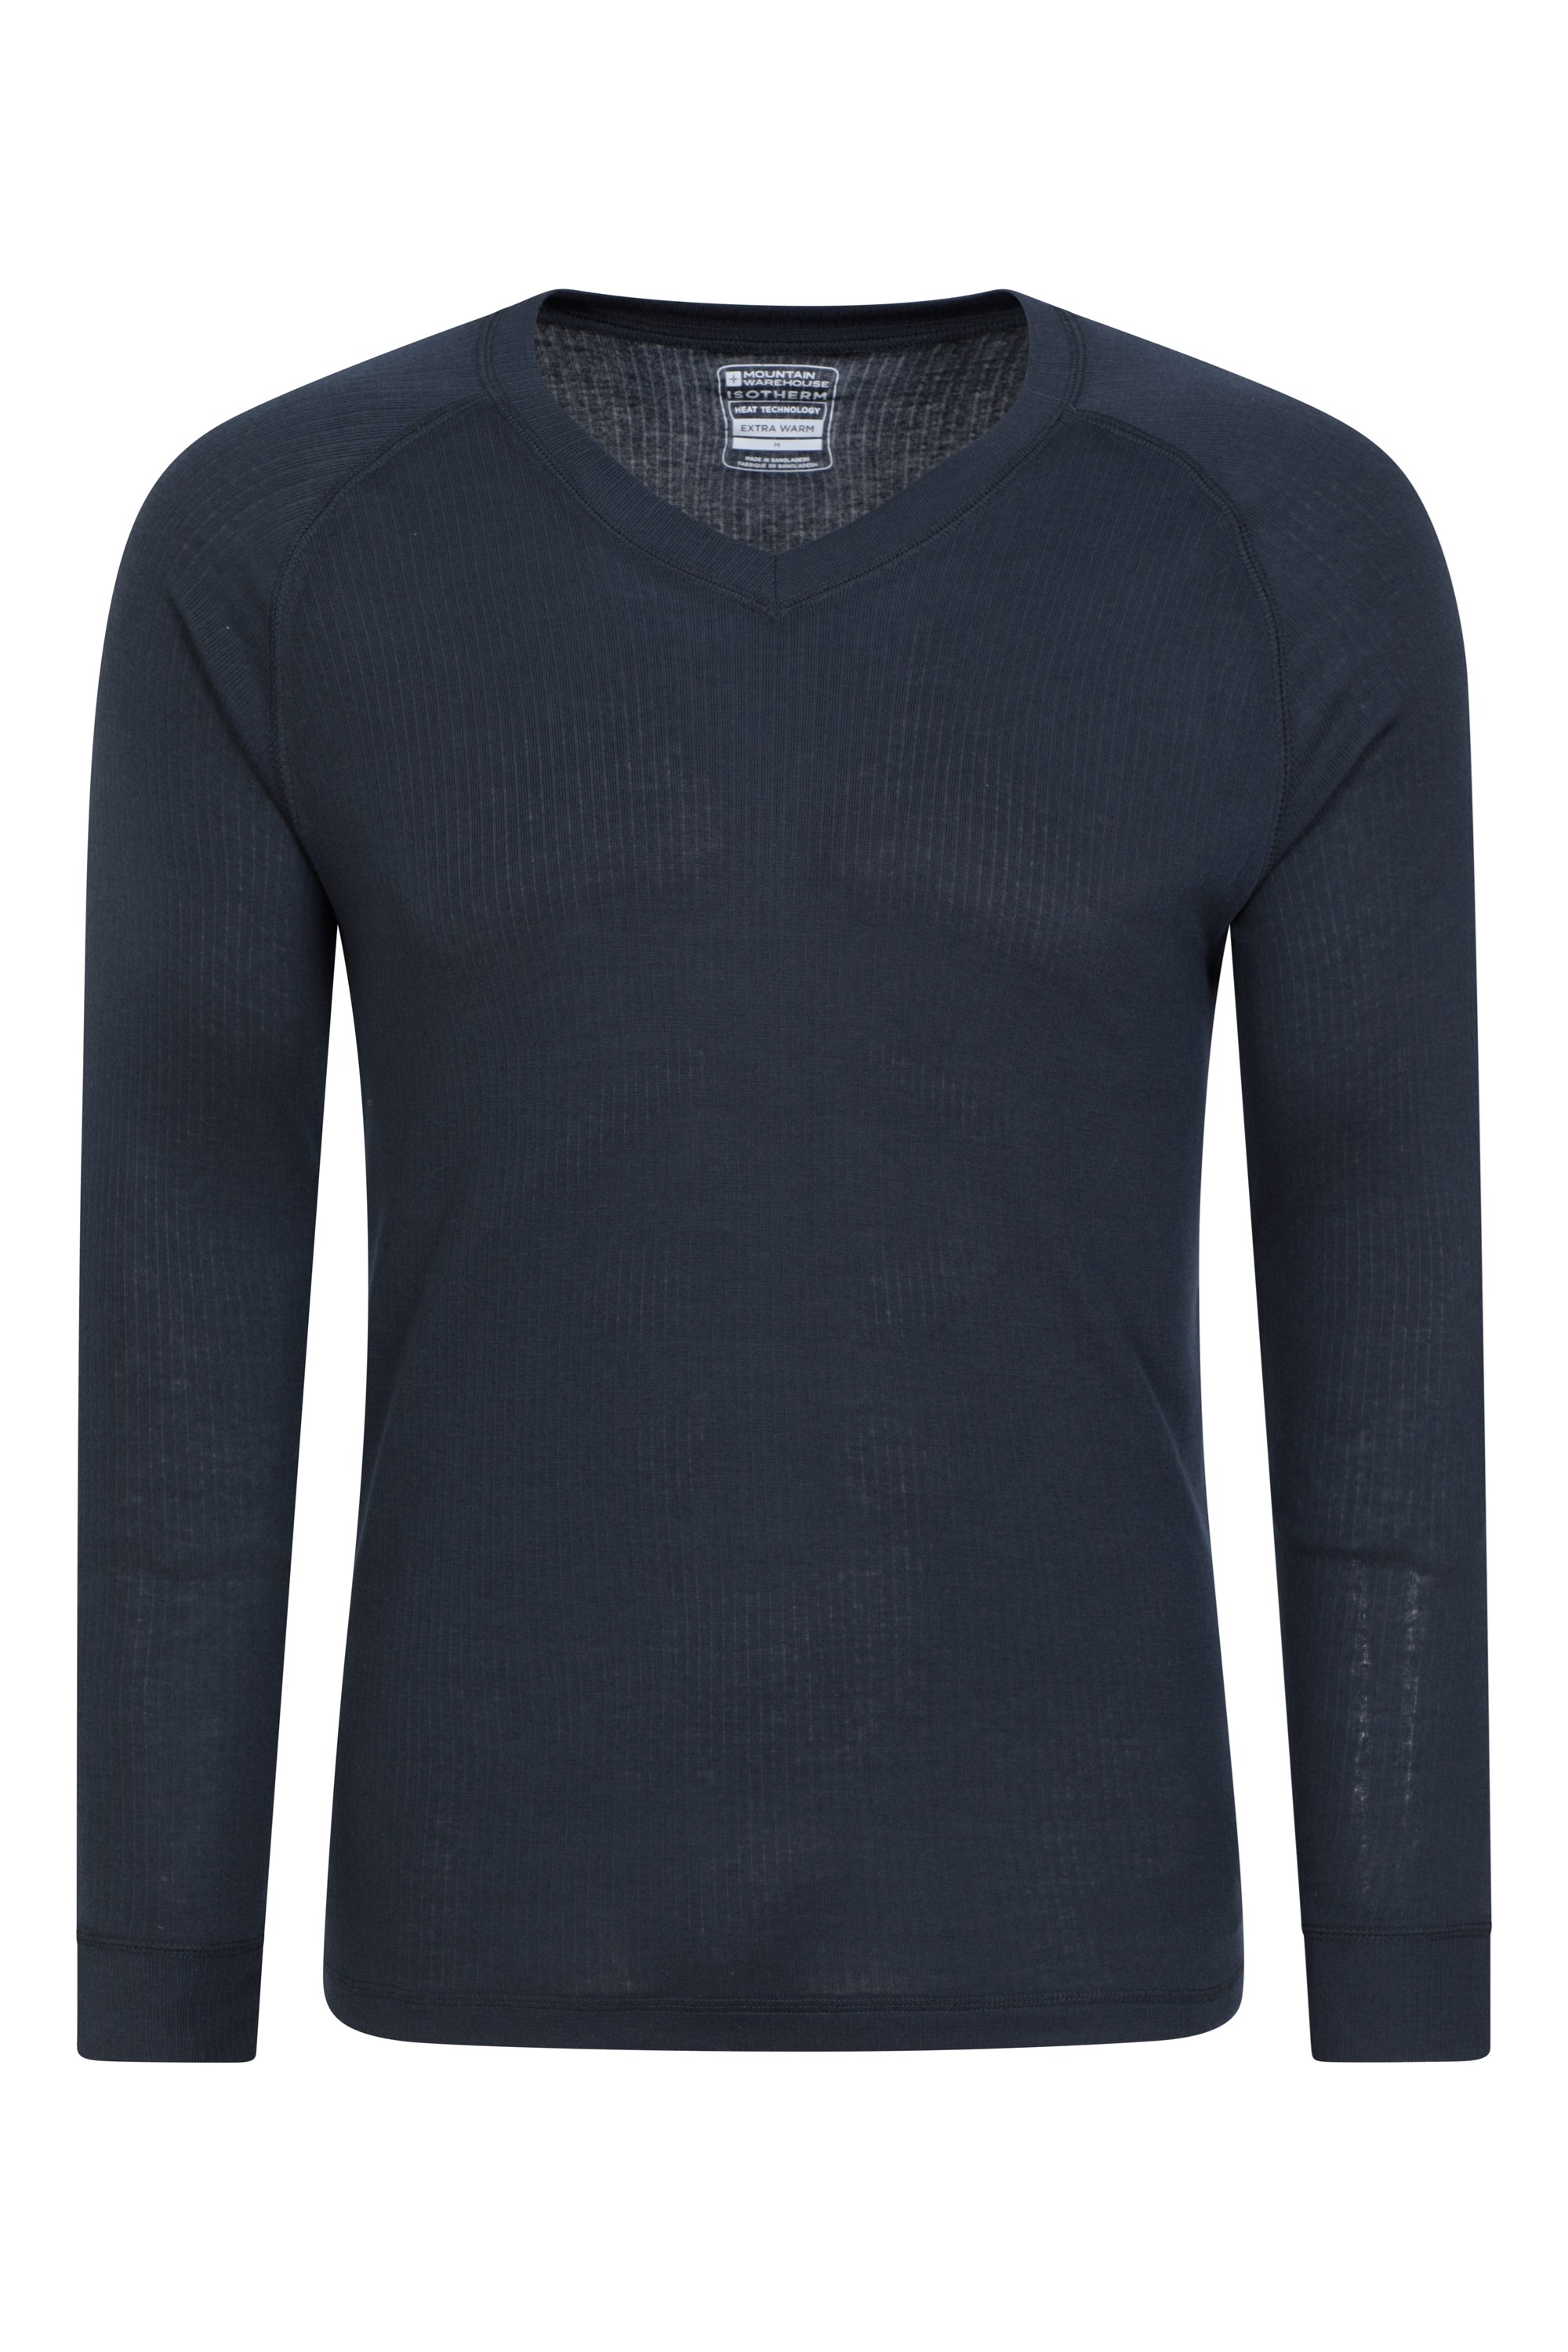 NEVICA Men's Banff Thermal Base Layer Long-Sleeve Top